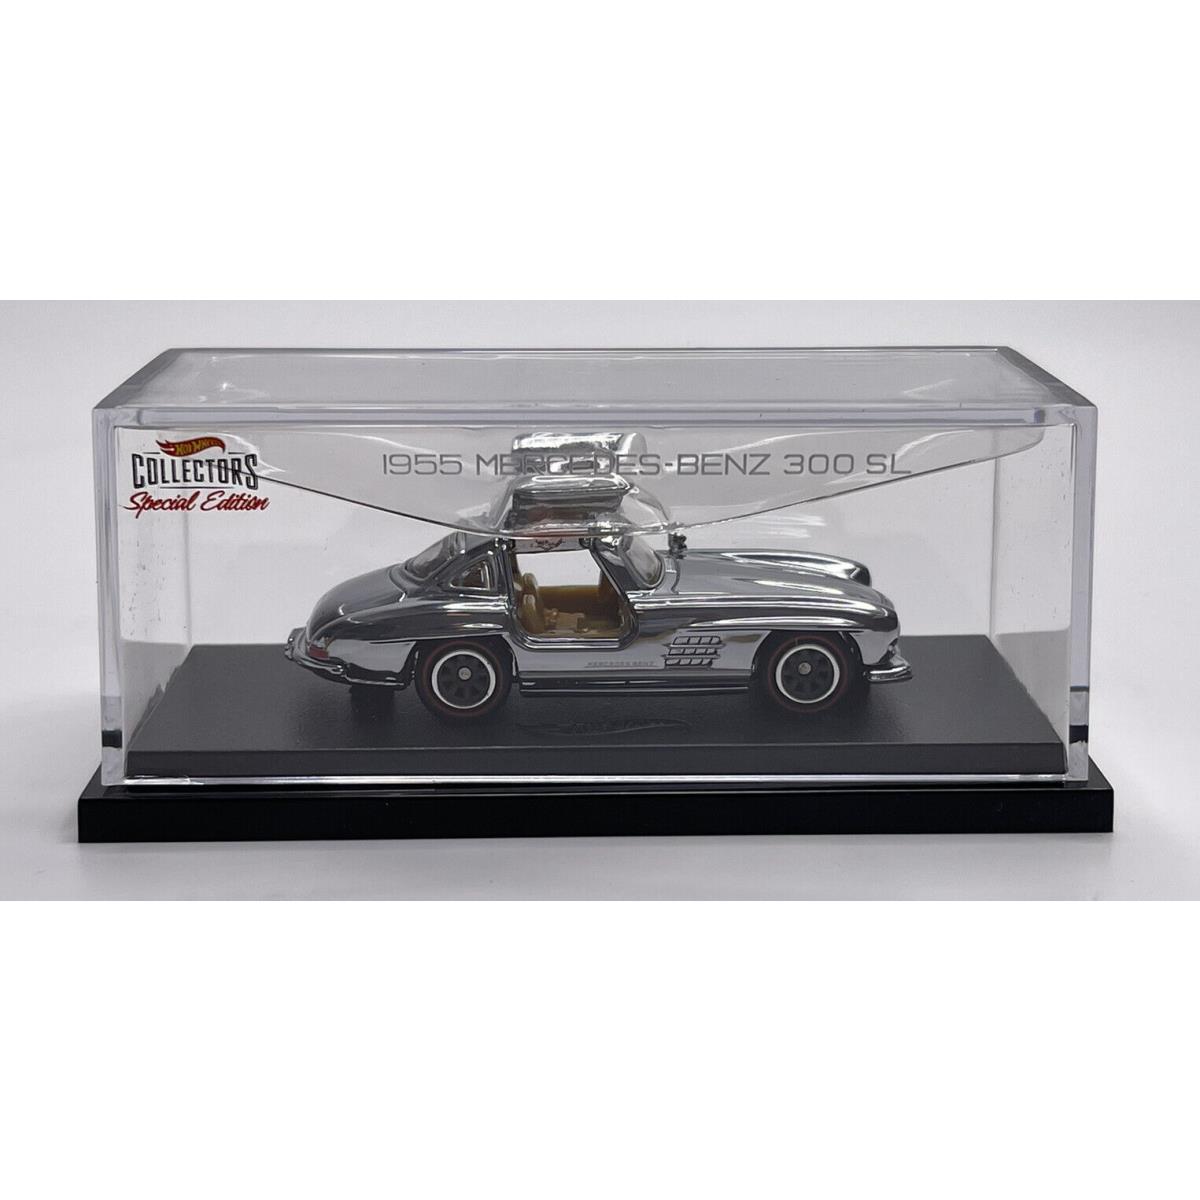 2021 Rlc `55 Mercedes-benz 300 SL Hwc Special Edition IN Hand and Numbered